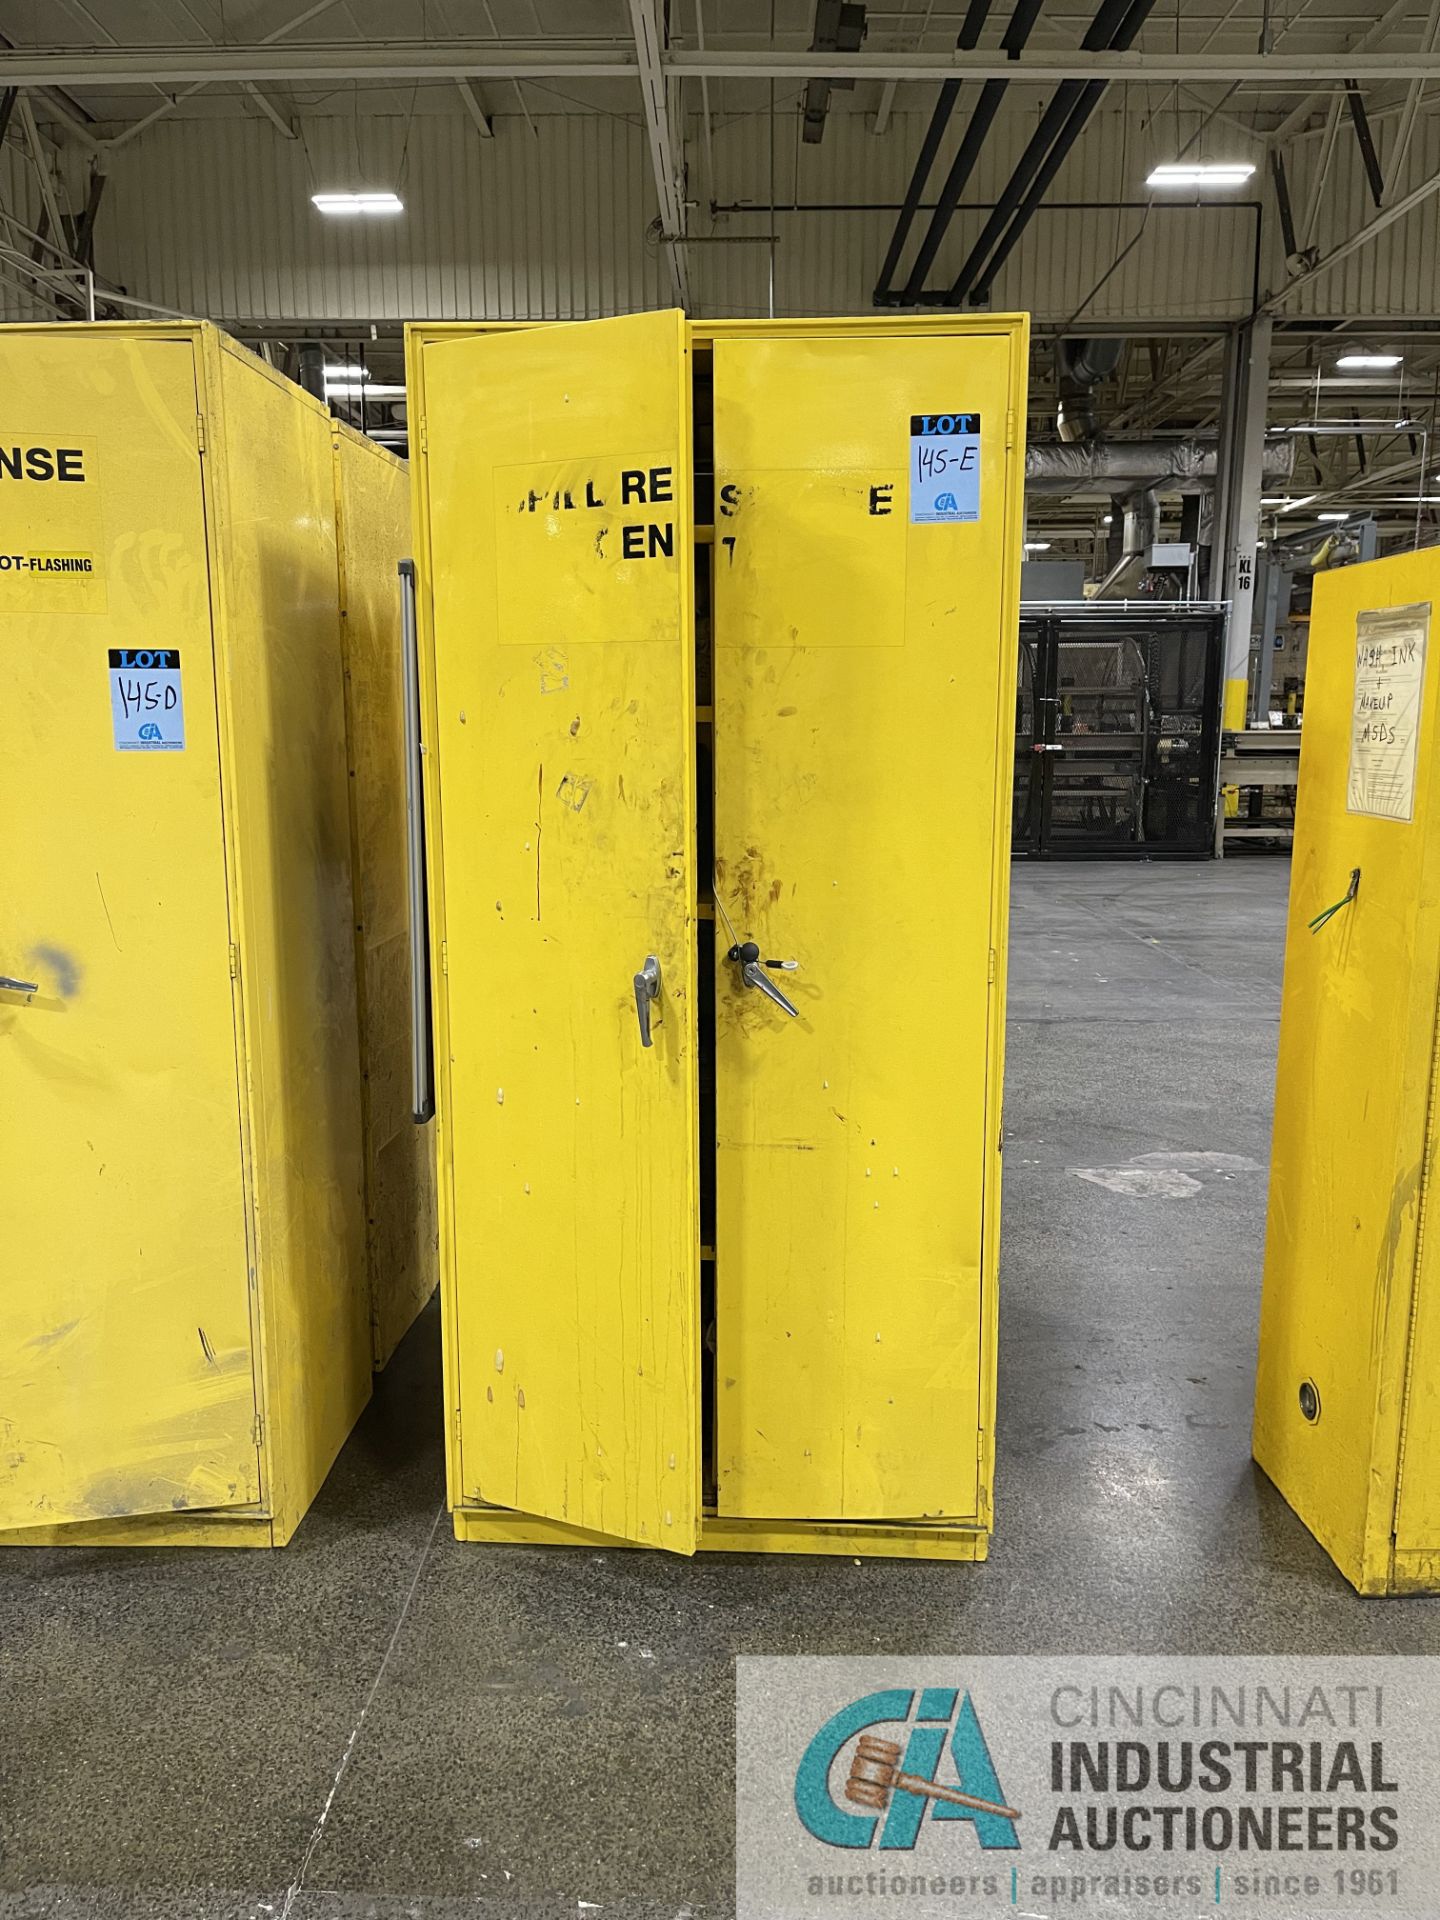 2-DOOR SPILL RESPONSE STORAGE CABINET WITH CONTENTS